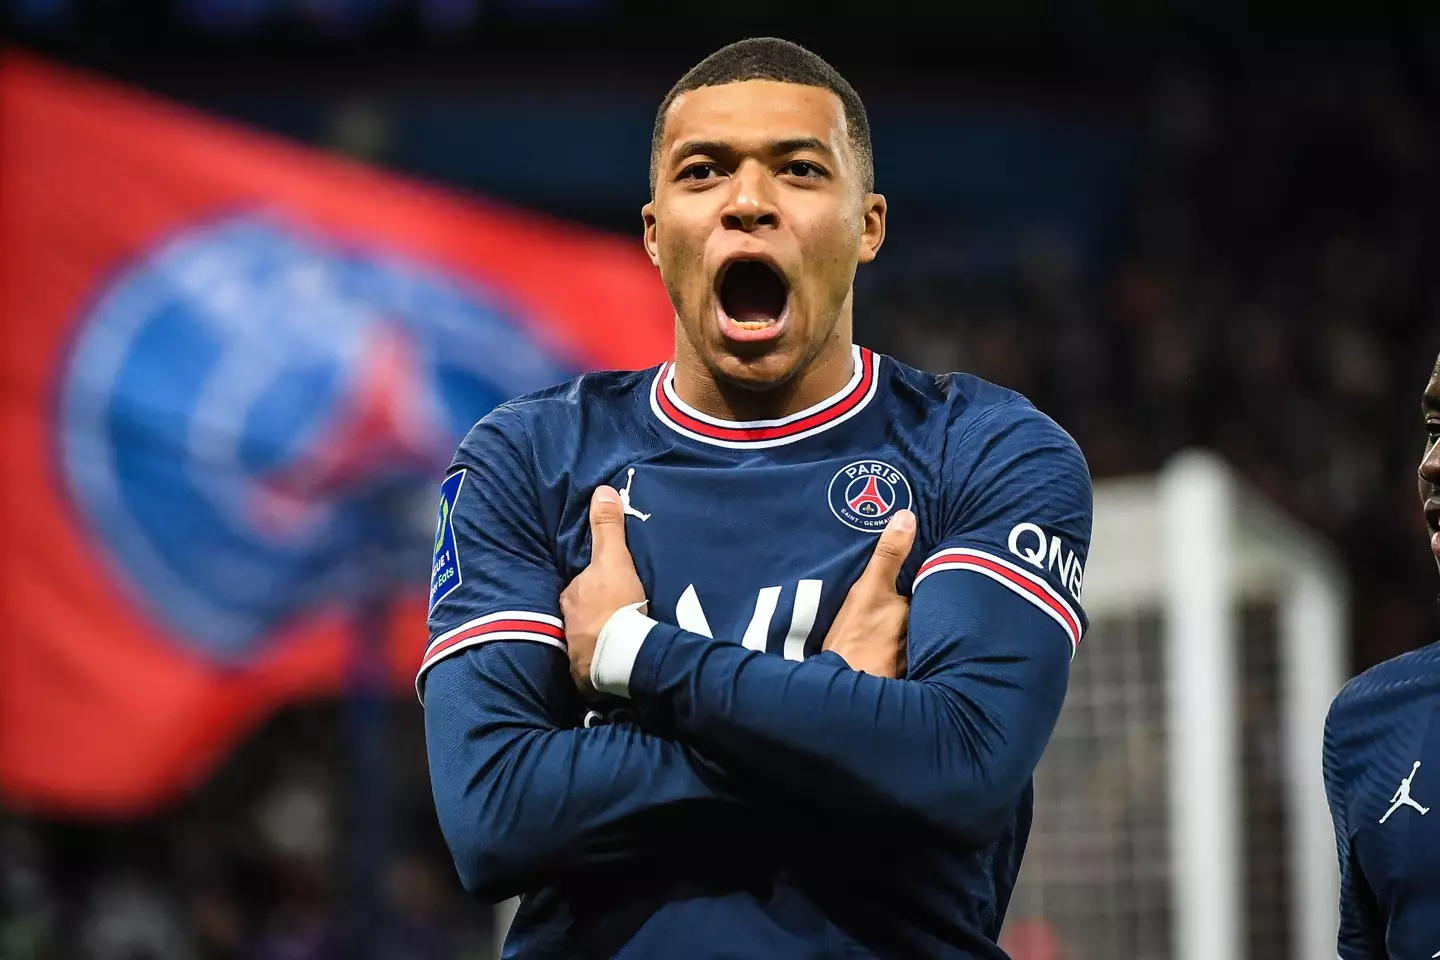 Mbappe has been strongly linked with a move to Real Madrid (Image: PA)